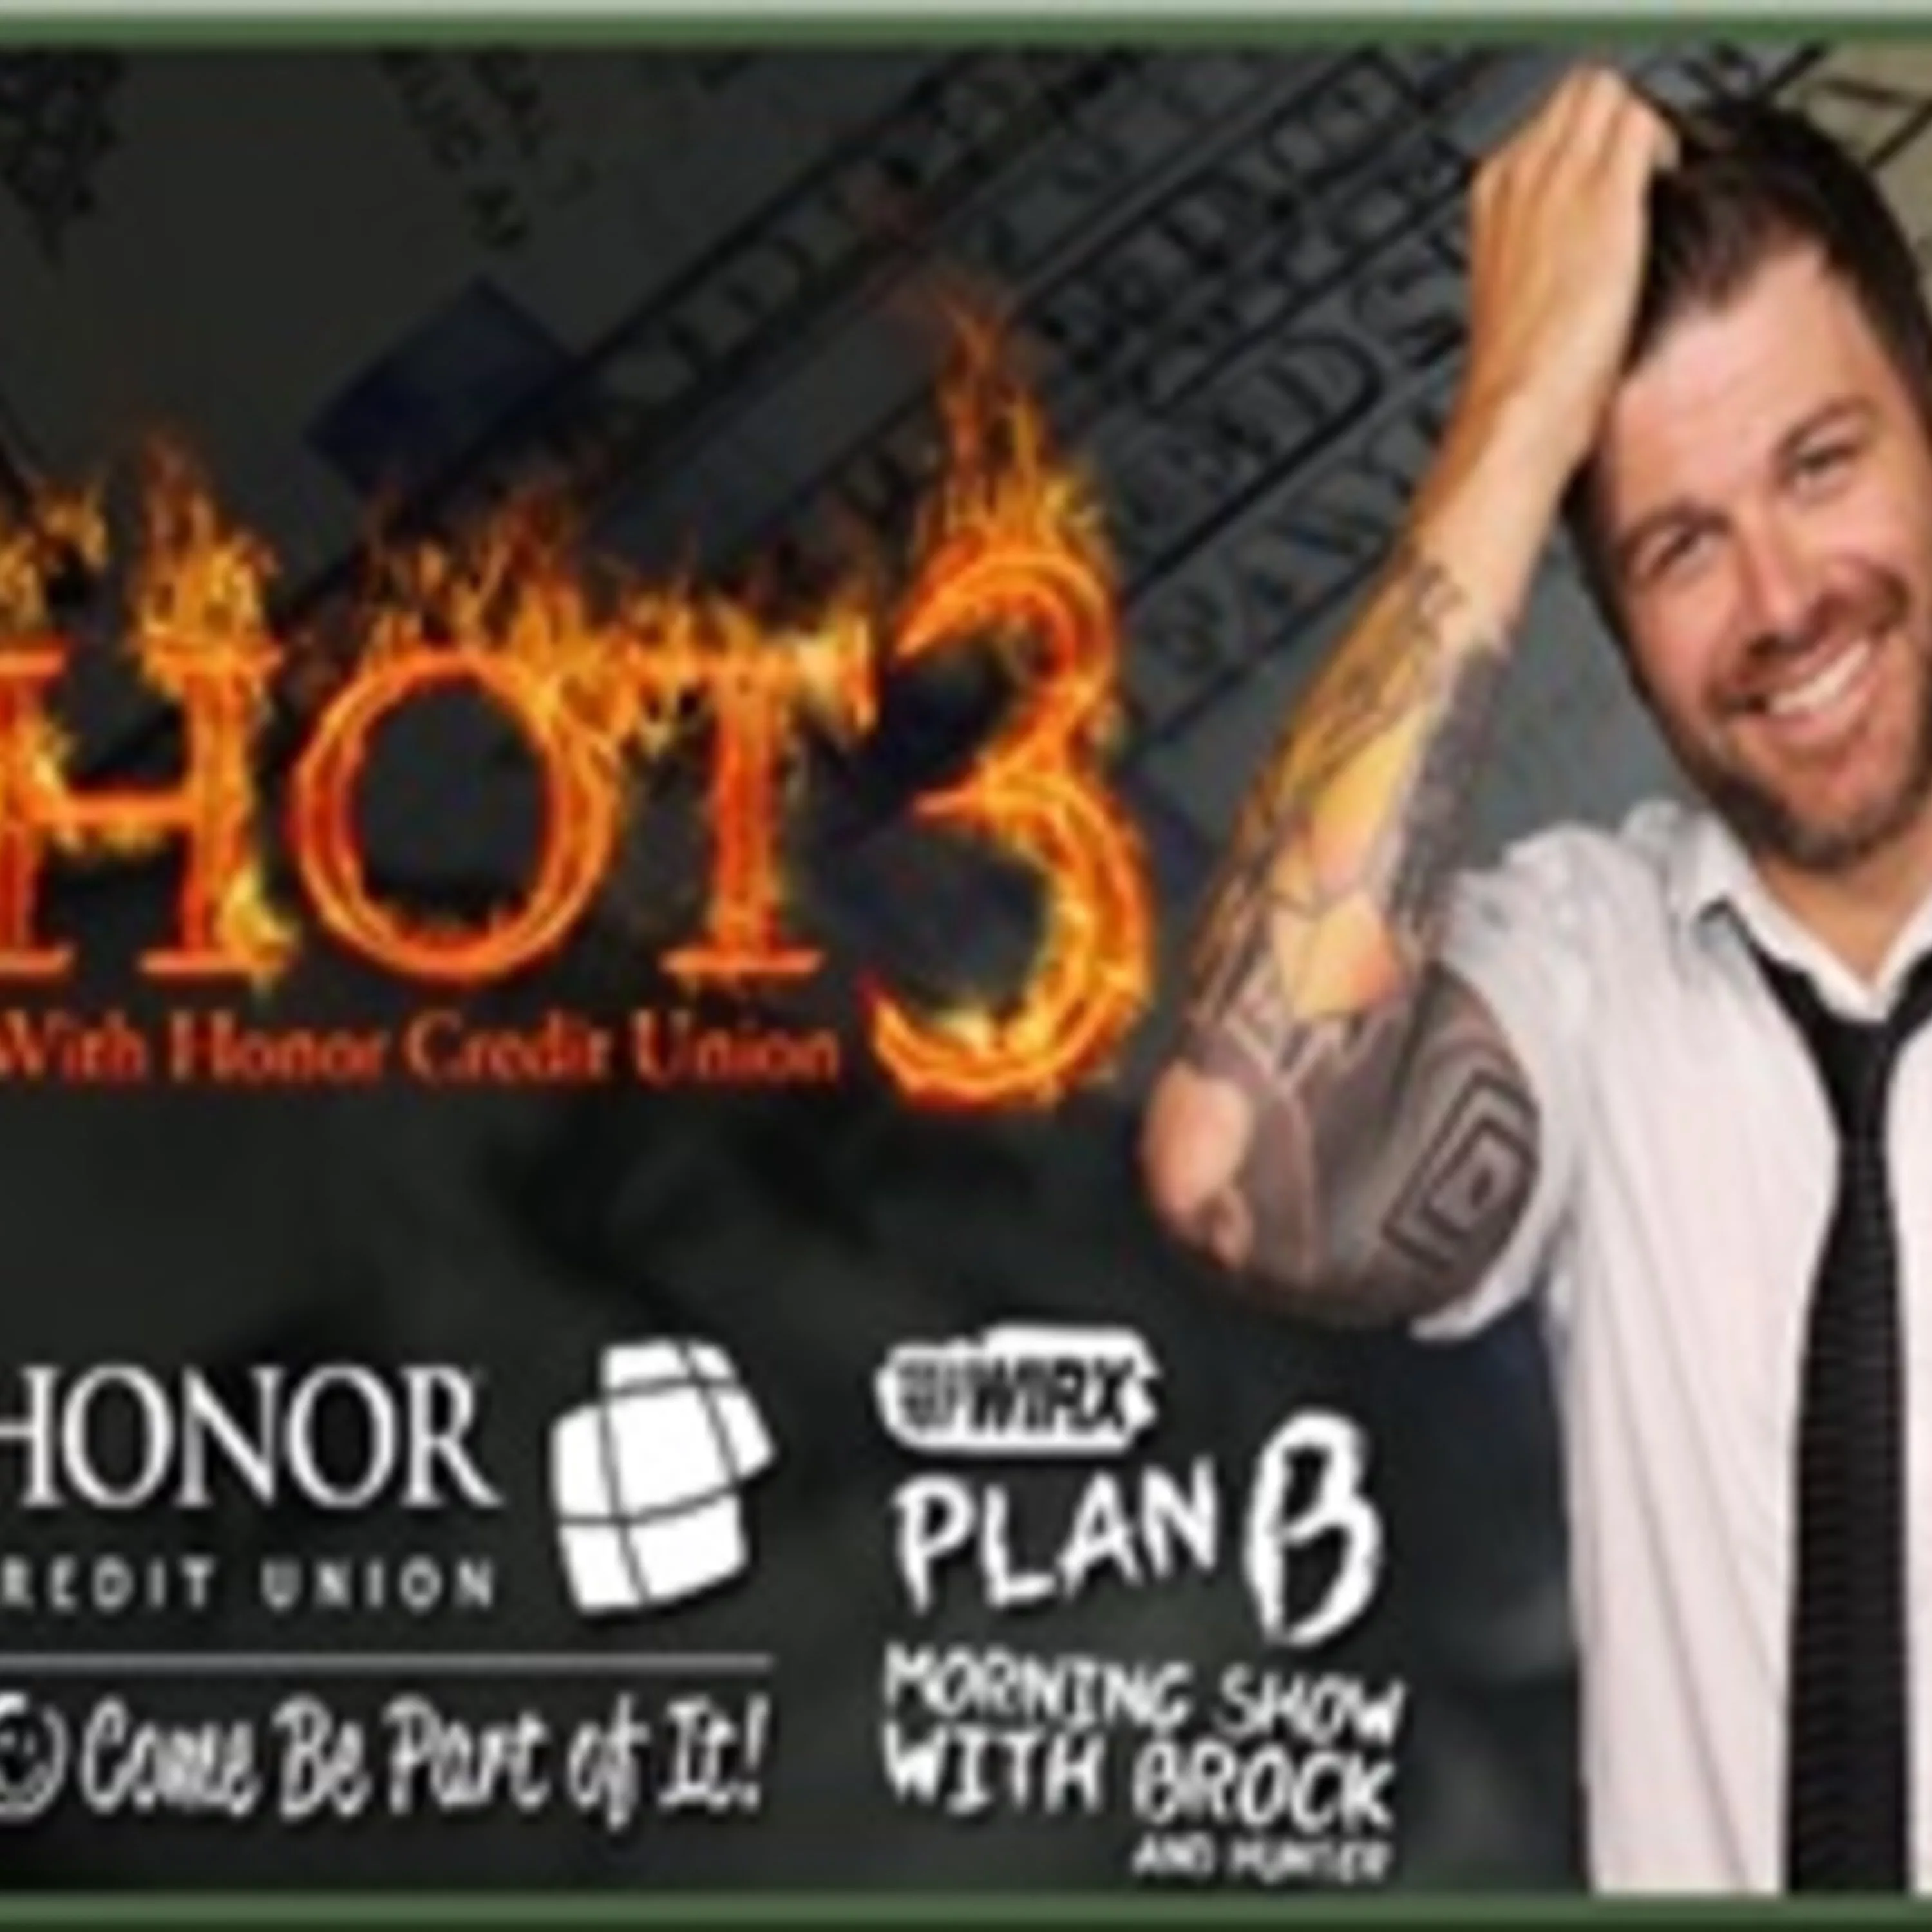 hot-3-with-honor-credit-union-come-be-part-of-it-skip-a-payment-options-2